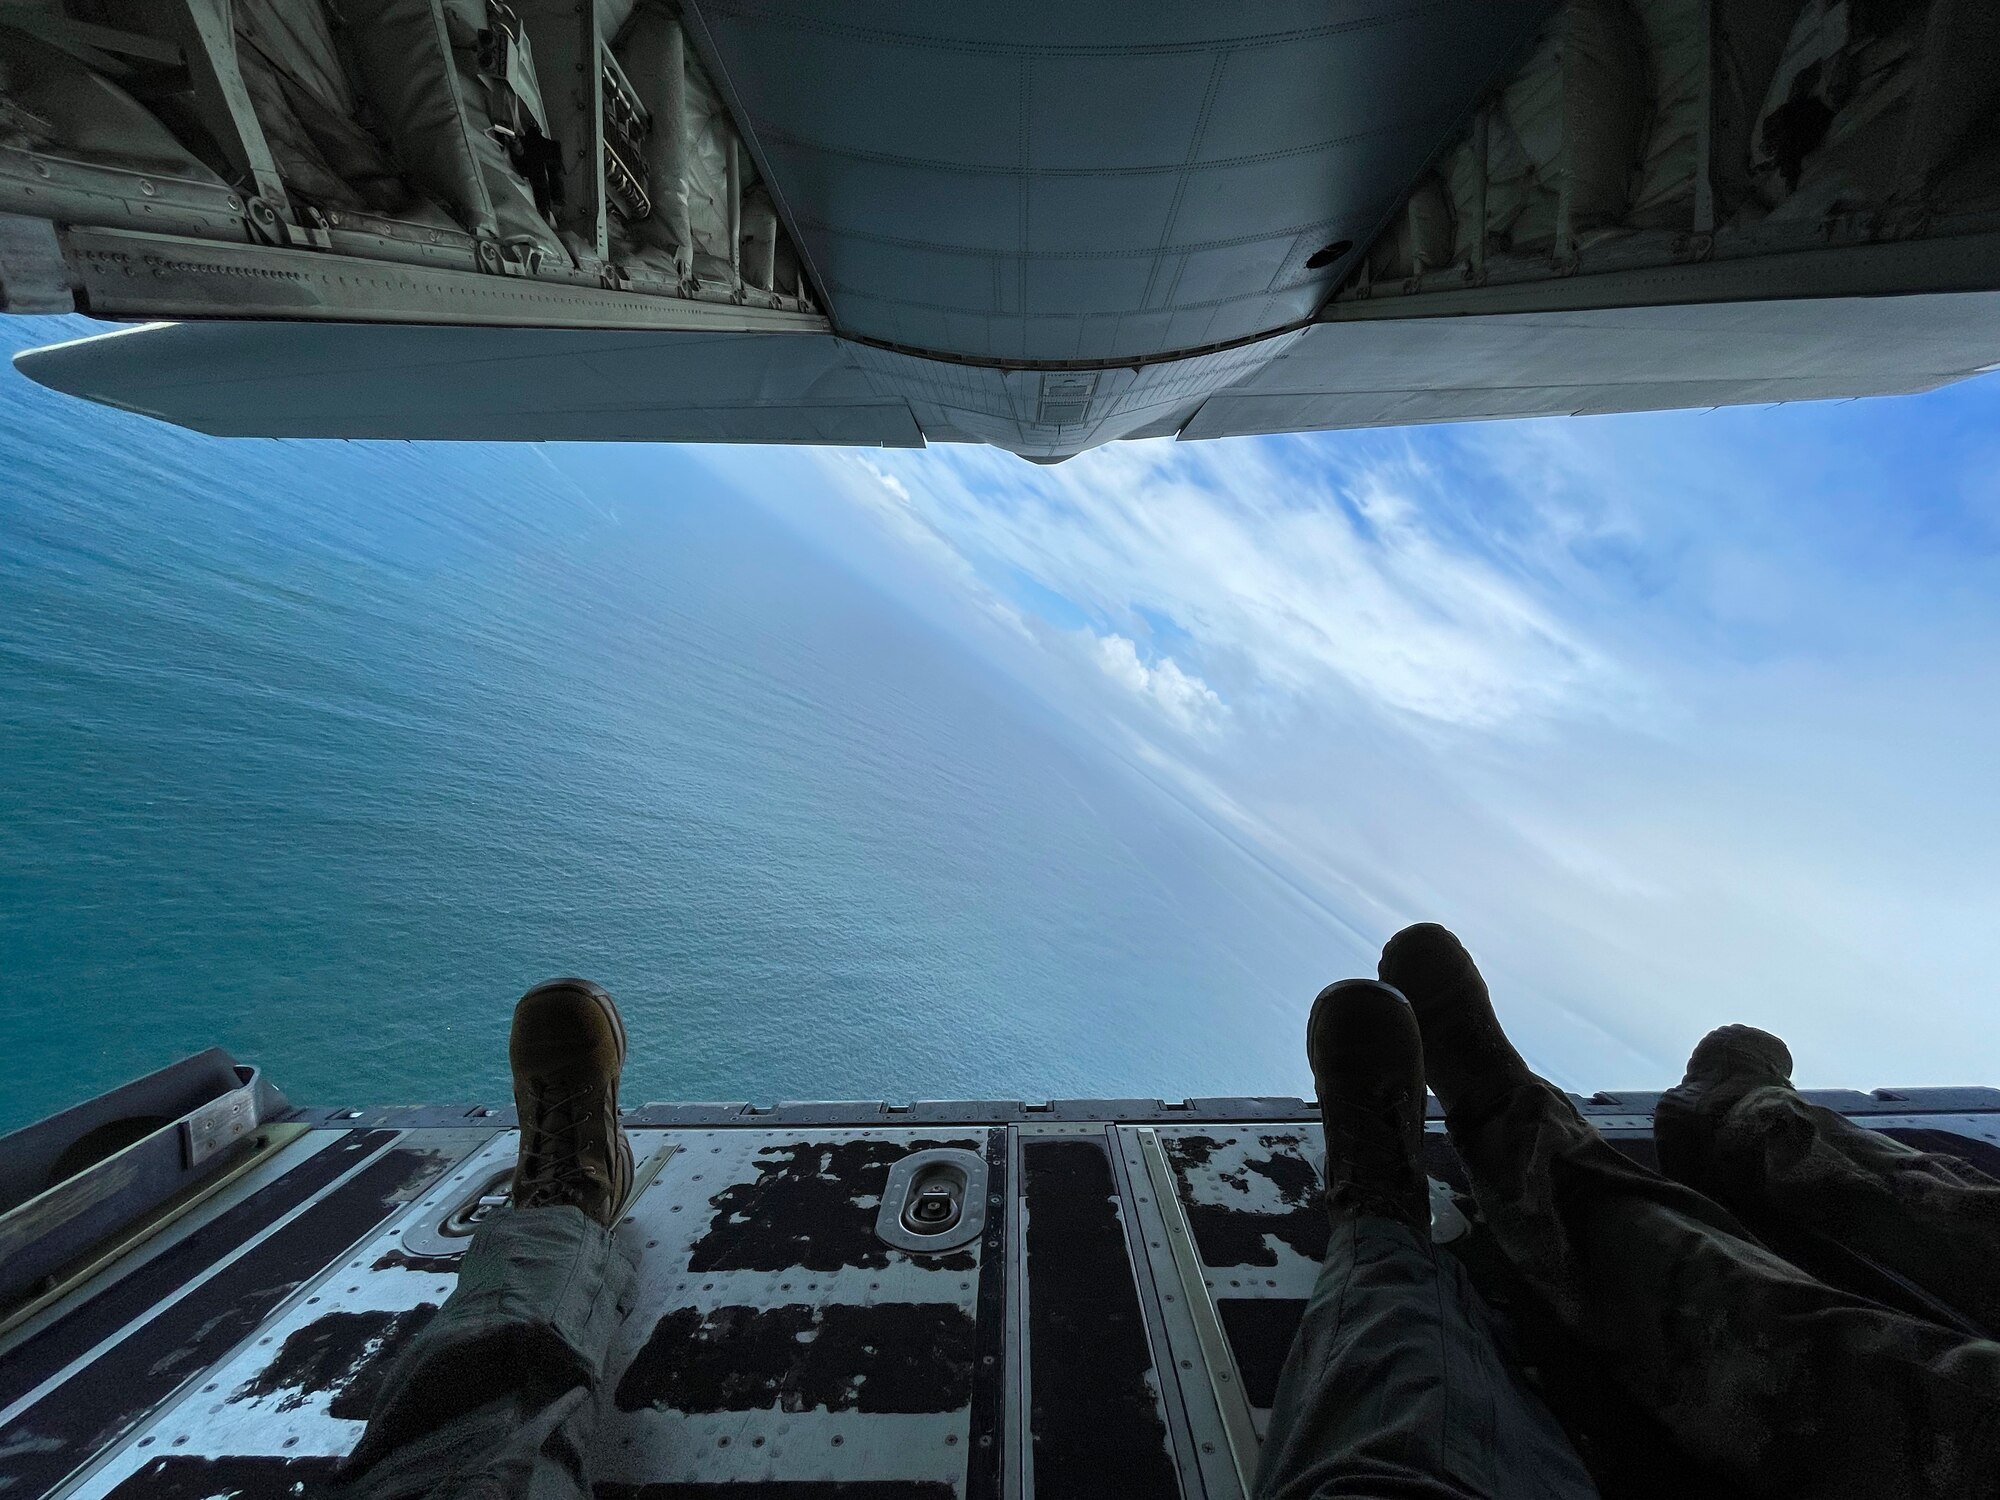 Feet dangle out the back of an aircraft flying over the open ocean